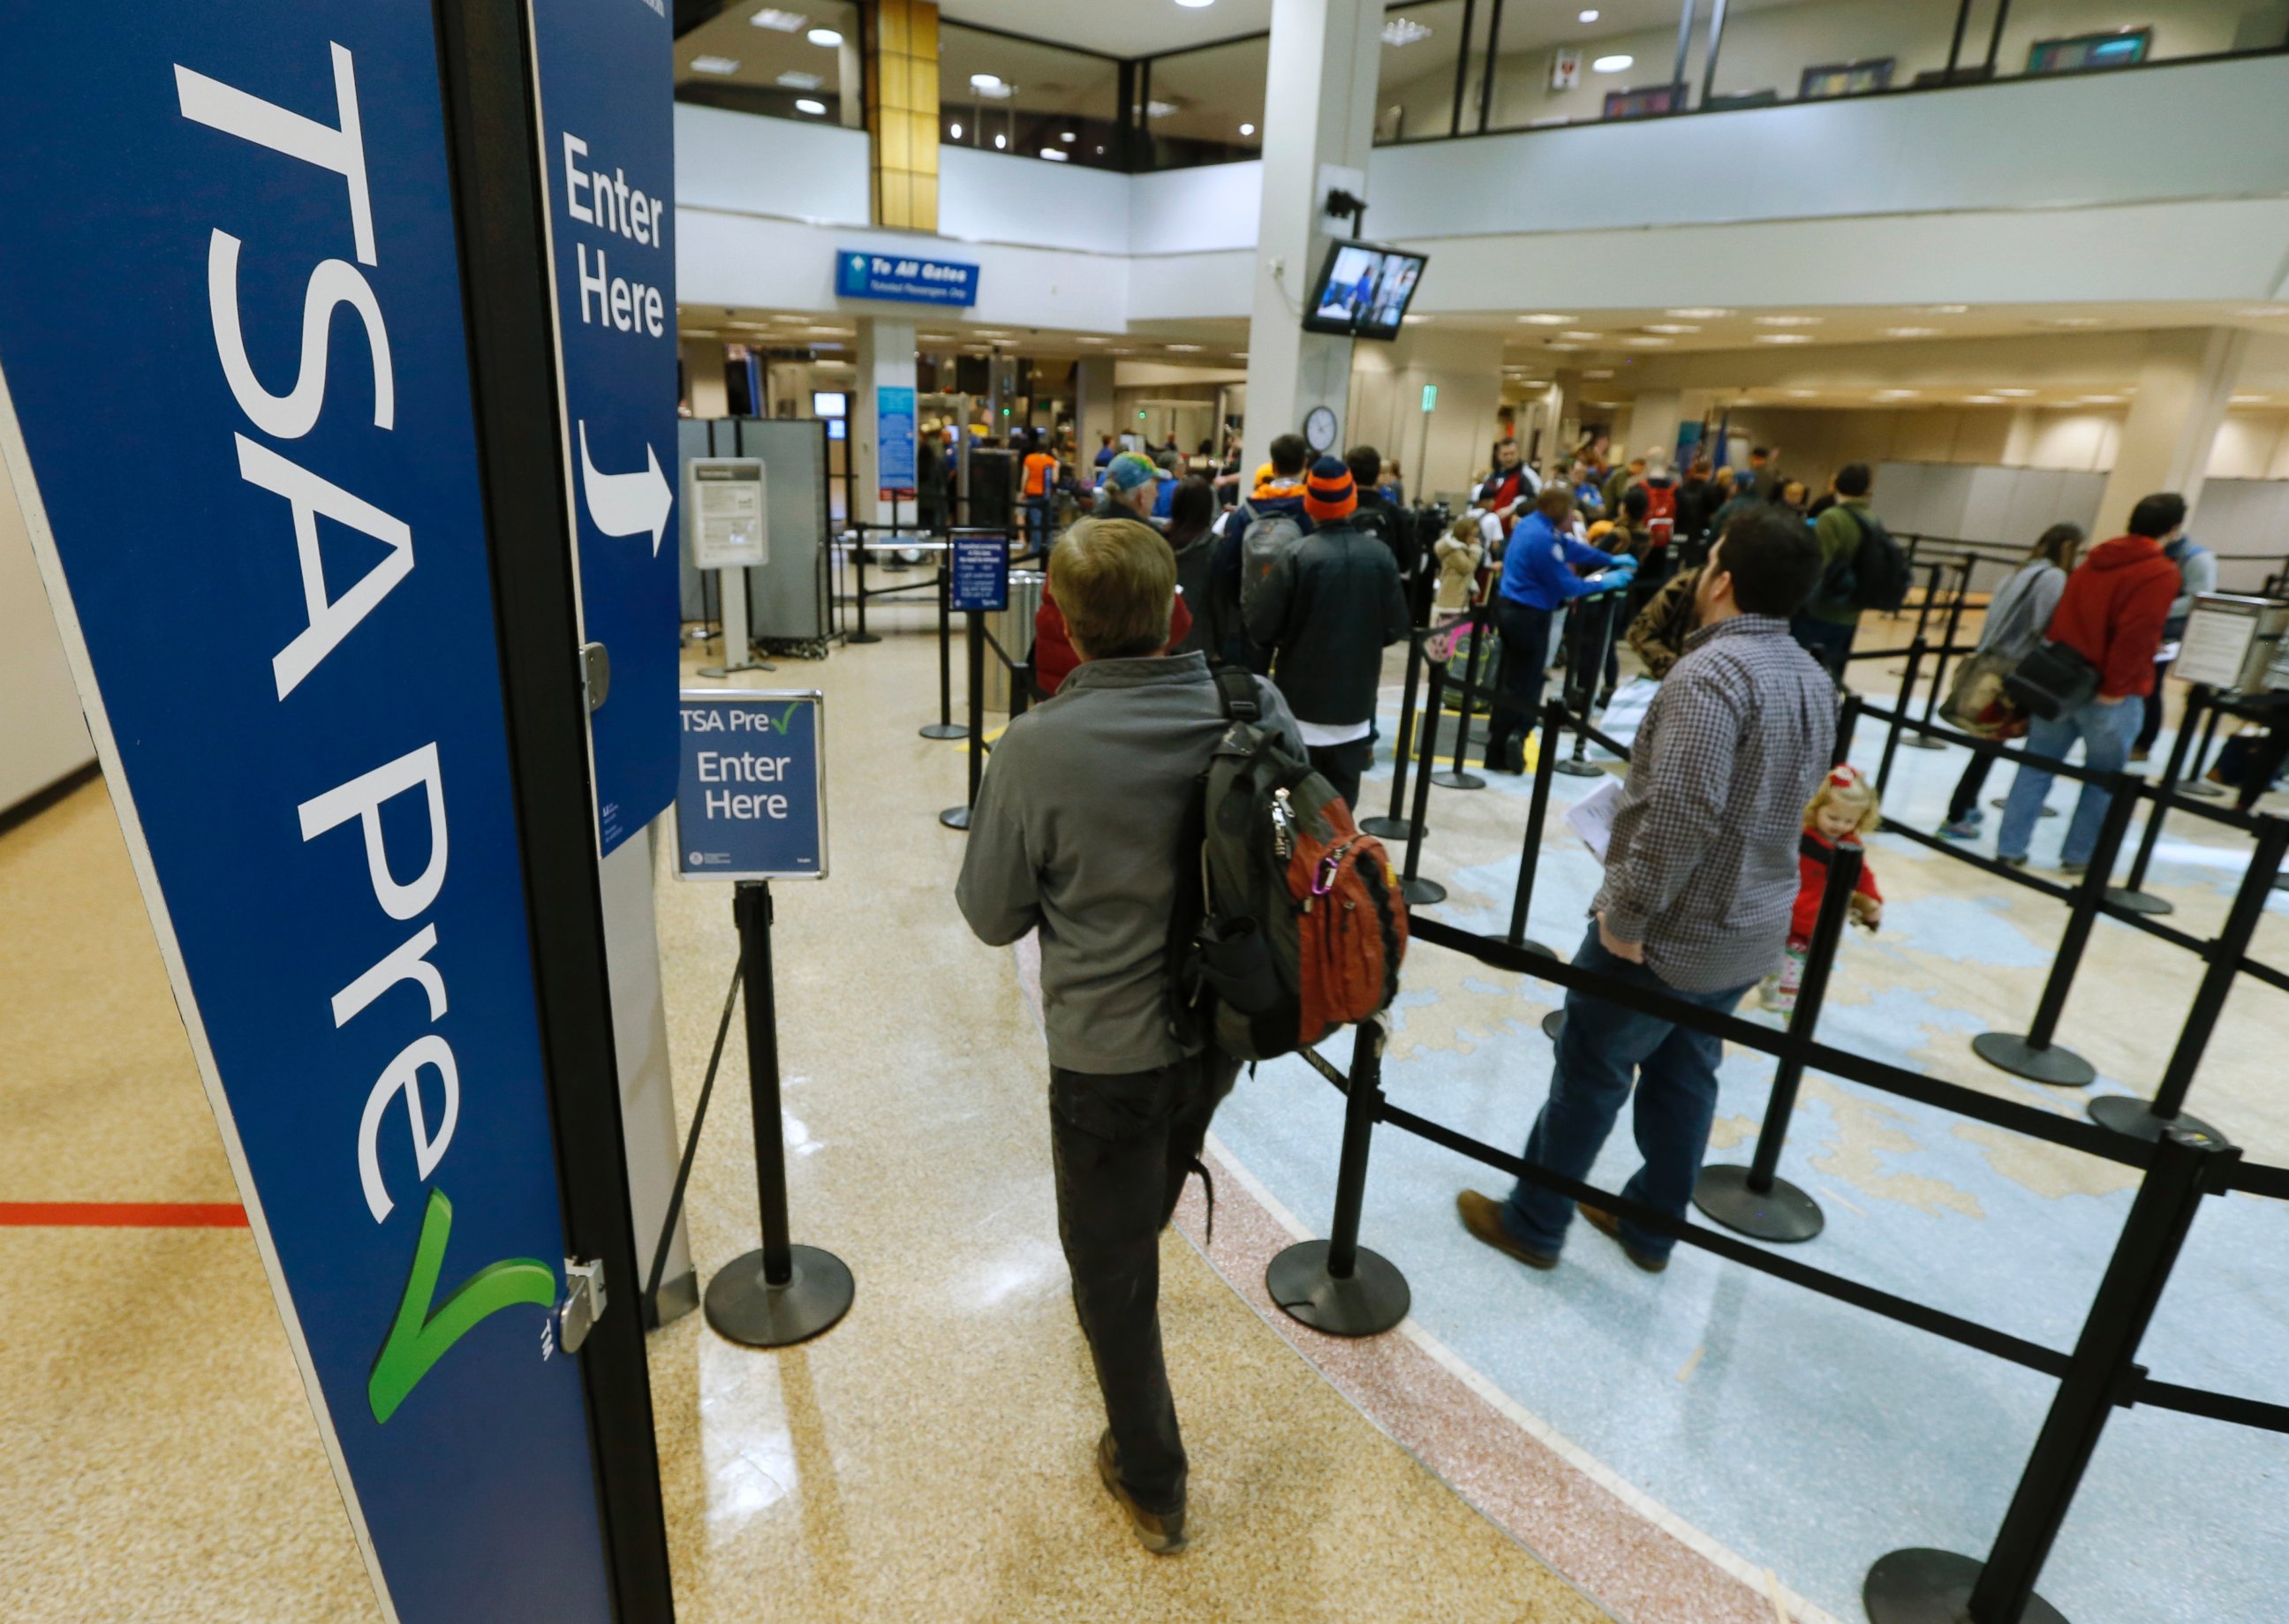 PHOTO: A passenger enters the Transportation Security Administration (TSA) pre-check line towards a security check point at Salt Lake City International Airport in Salt Lake City, on Dec. 23, 2014. 